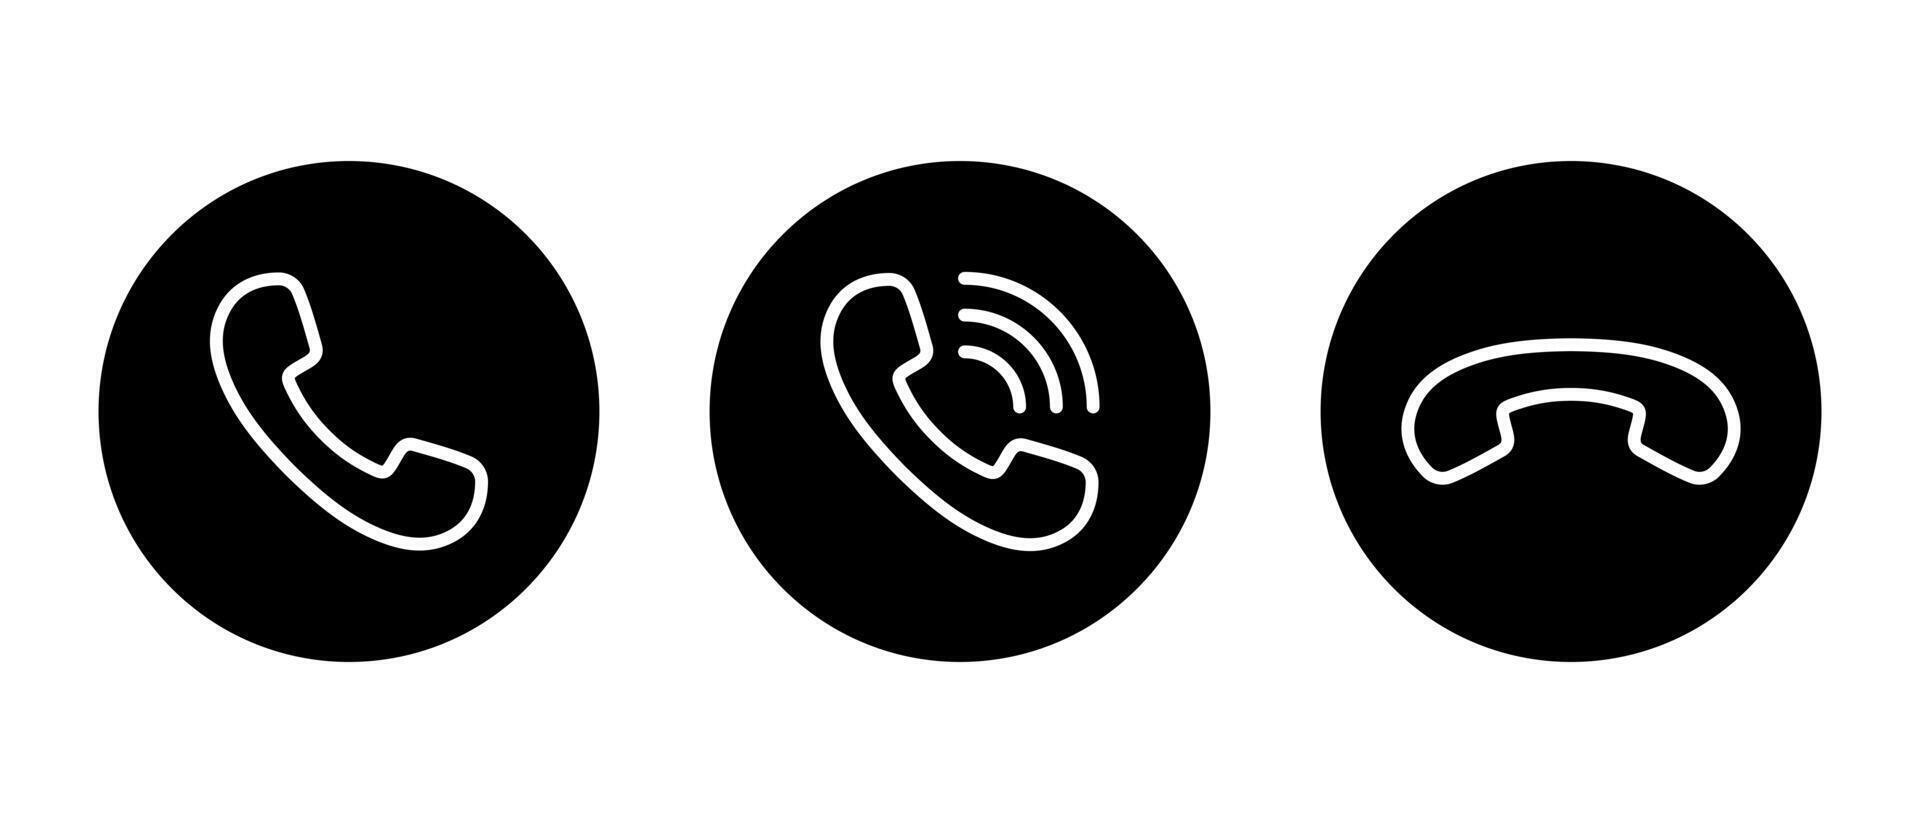 Phone, handset line icon on black circle. Telephone concept vector